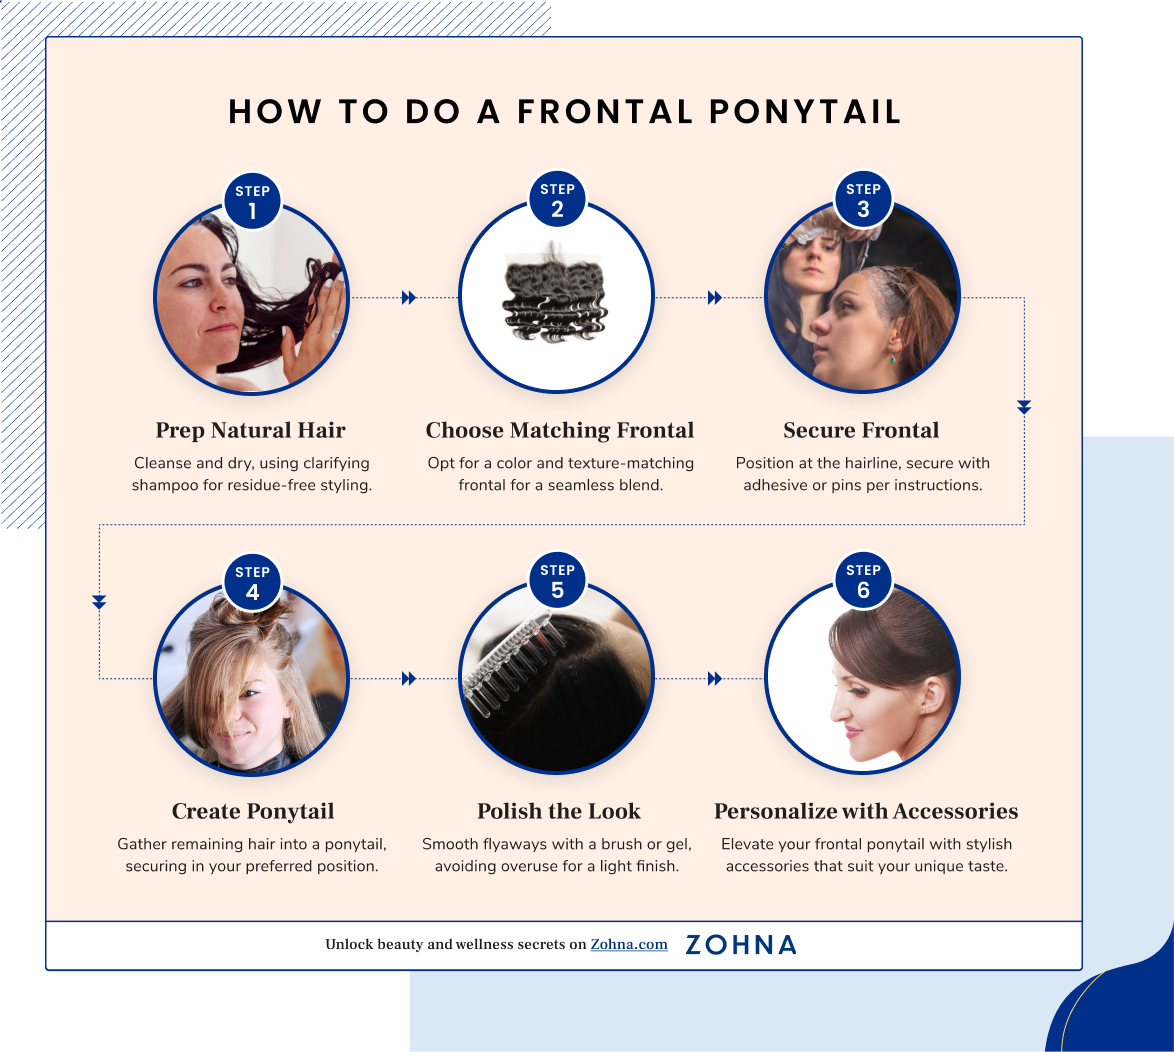 How To Do A Frontal Ponytail